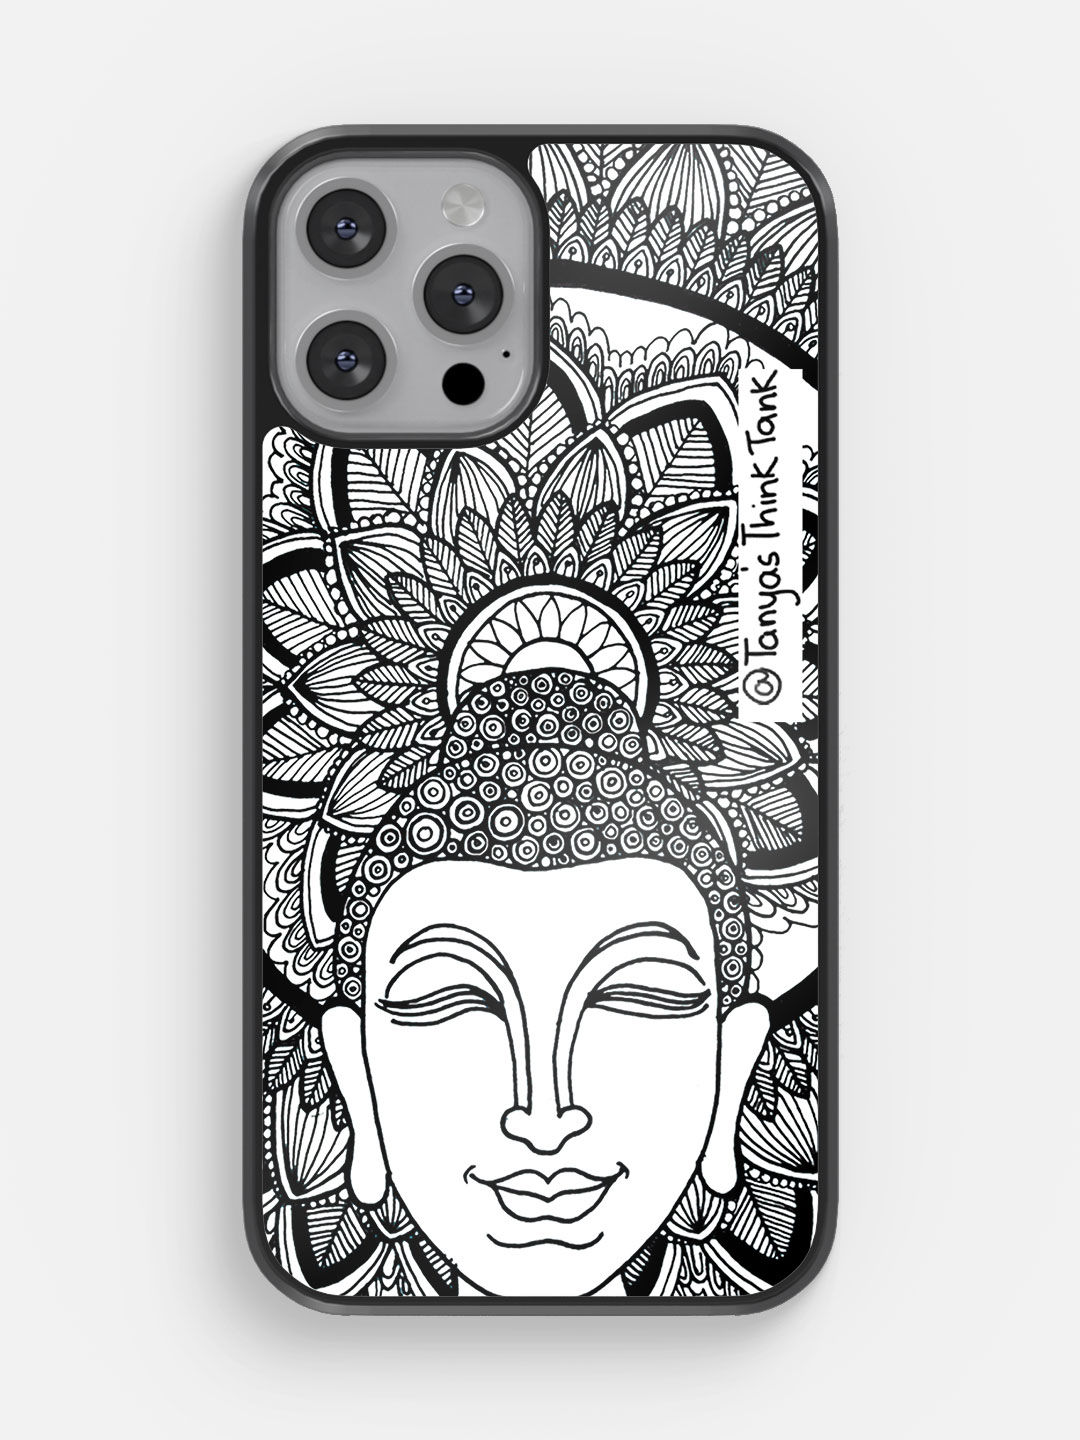 Buy Buddha - Bumper Phone Case for iPhone 12 Pro Max Phone Cases & Covers Online